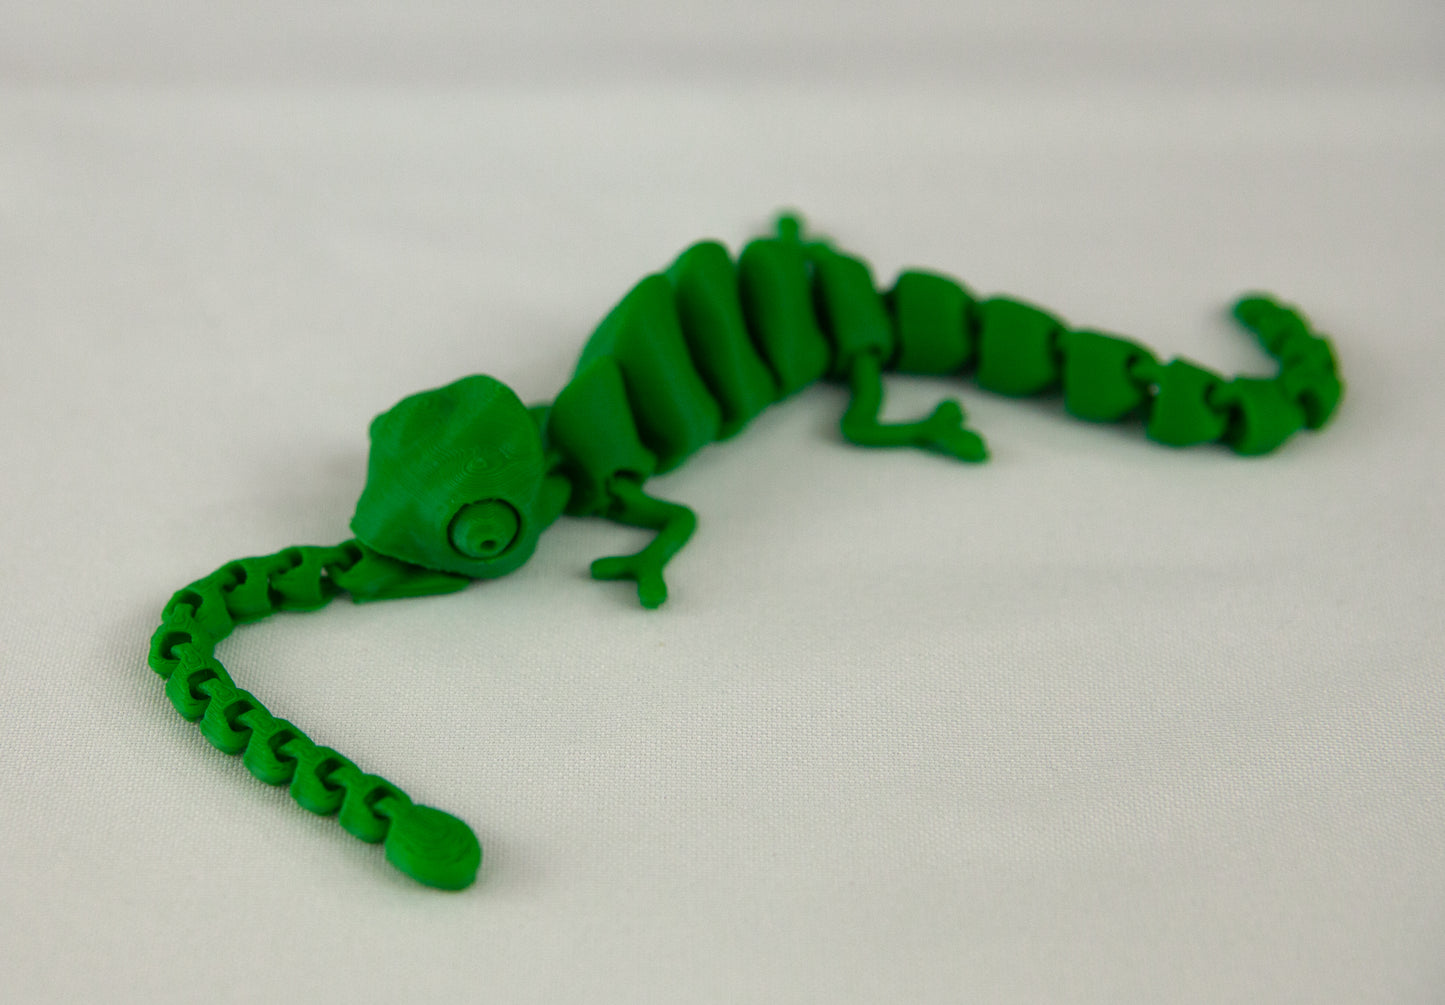 3D Printed Articulated Chameleon